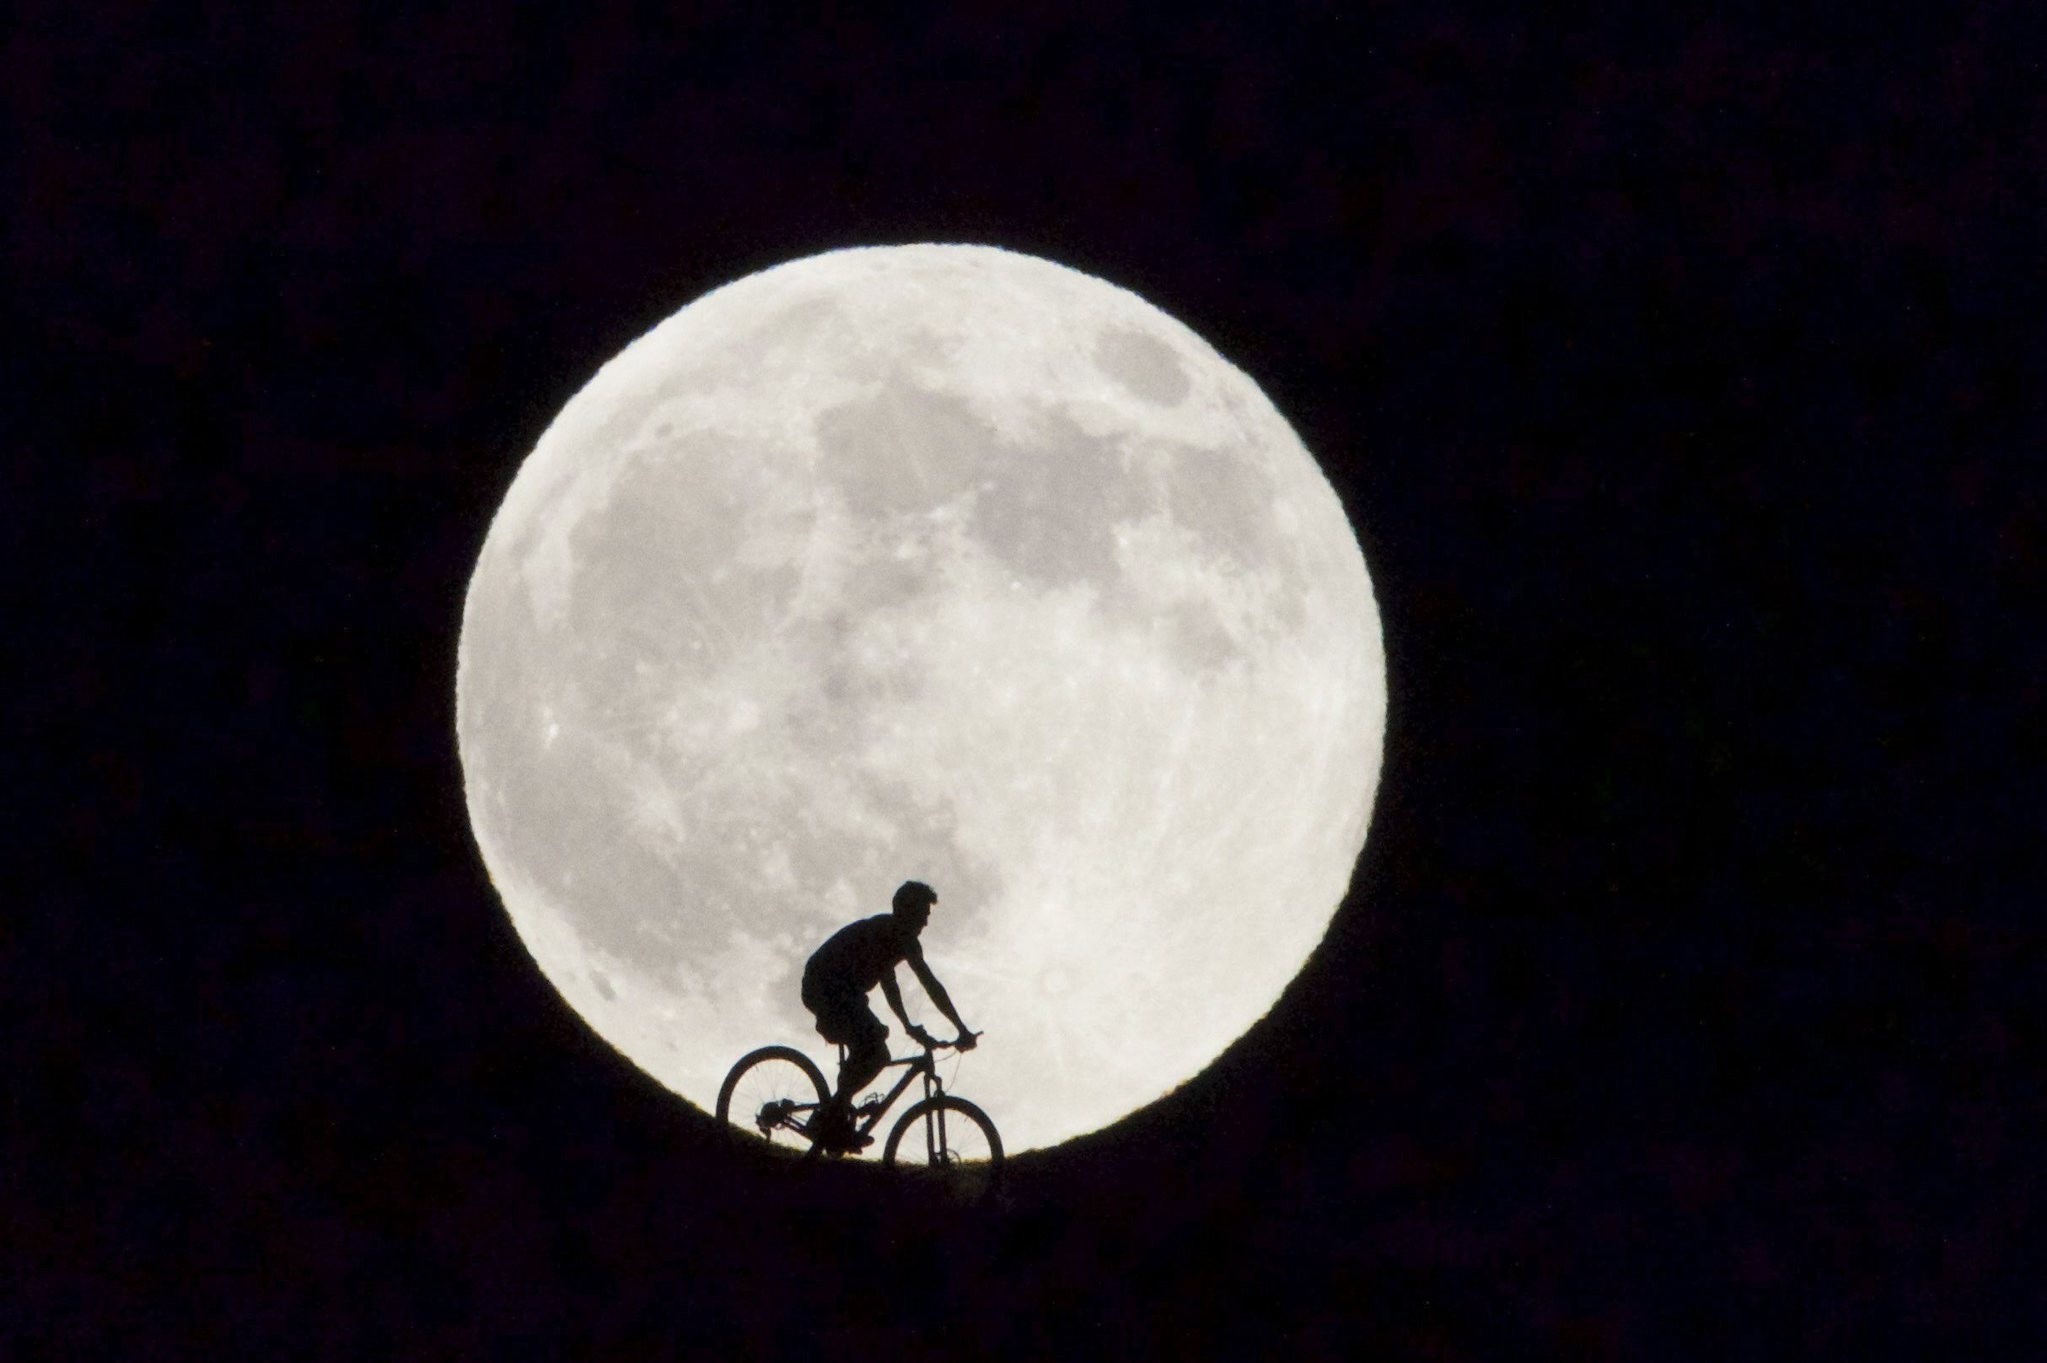  A cyclist is seen passing before the supermoon in Fuerteventura, Canary Islands, Spain, 29 August 2015. (EPA Photo)